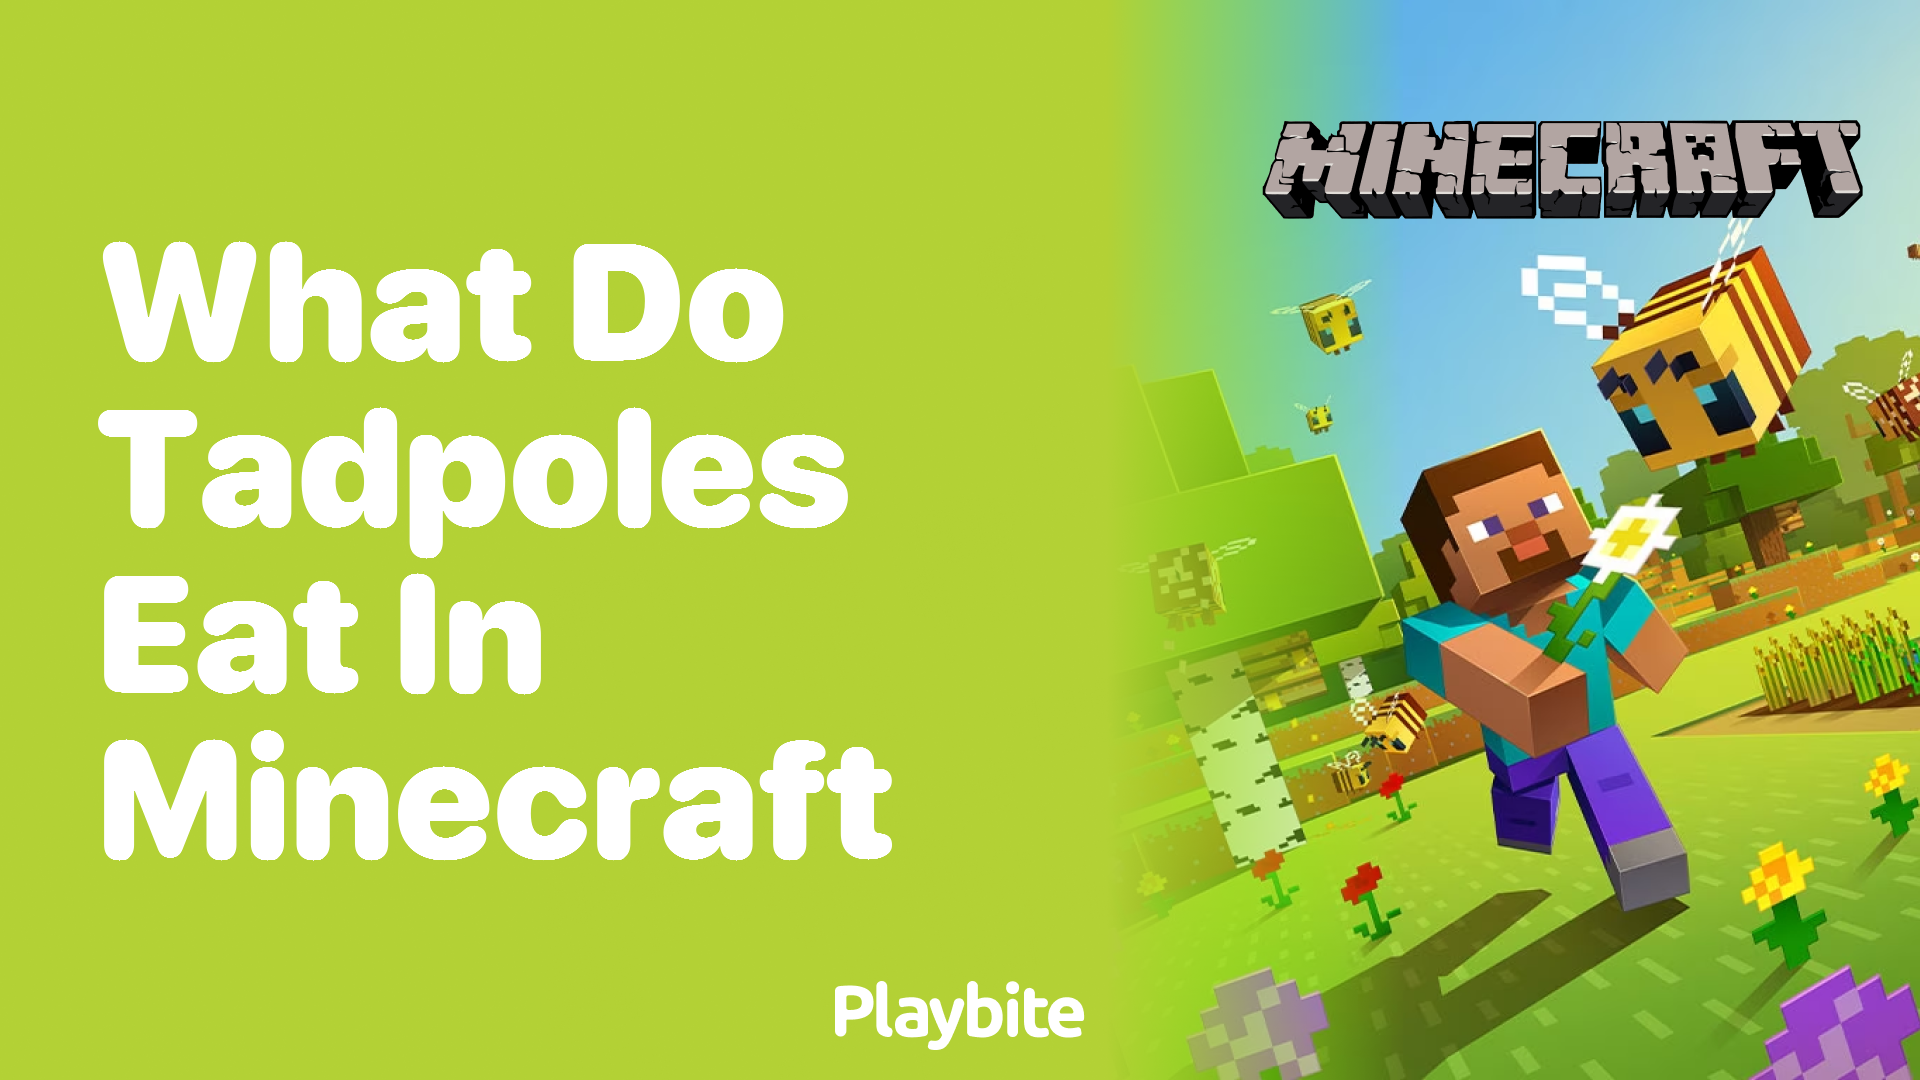 What Do Tadpoles Eat in Minecraft? - Playbite